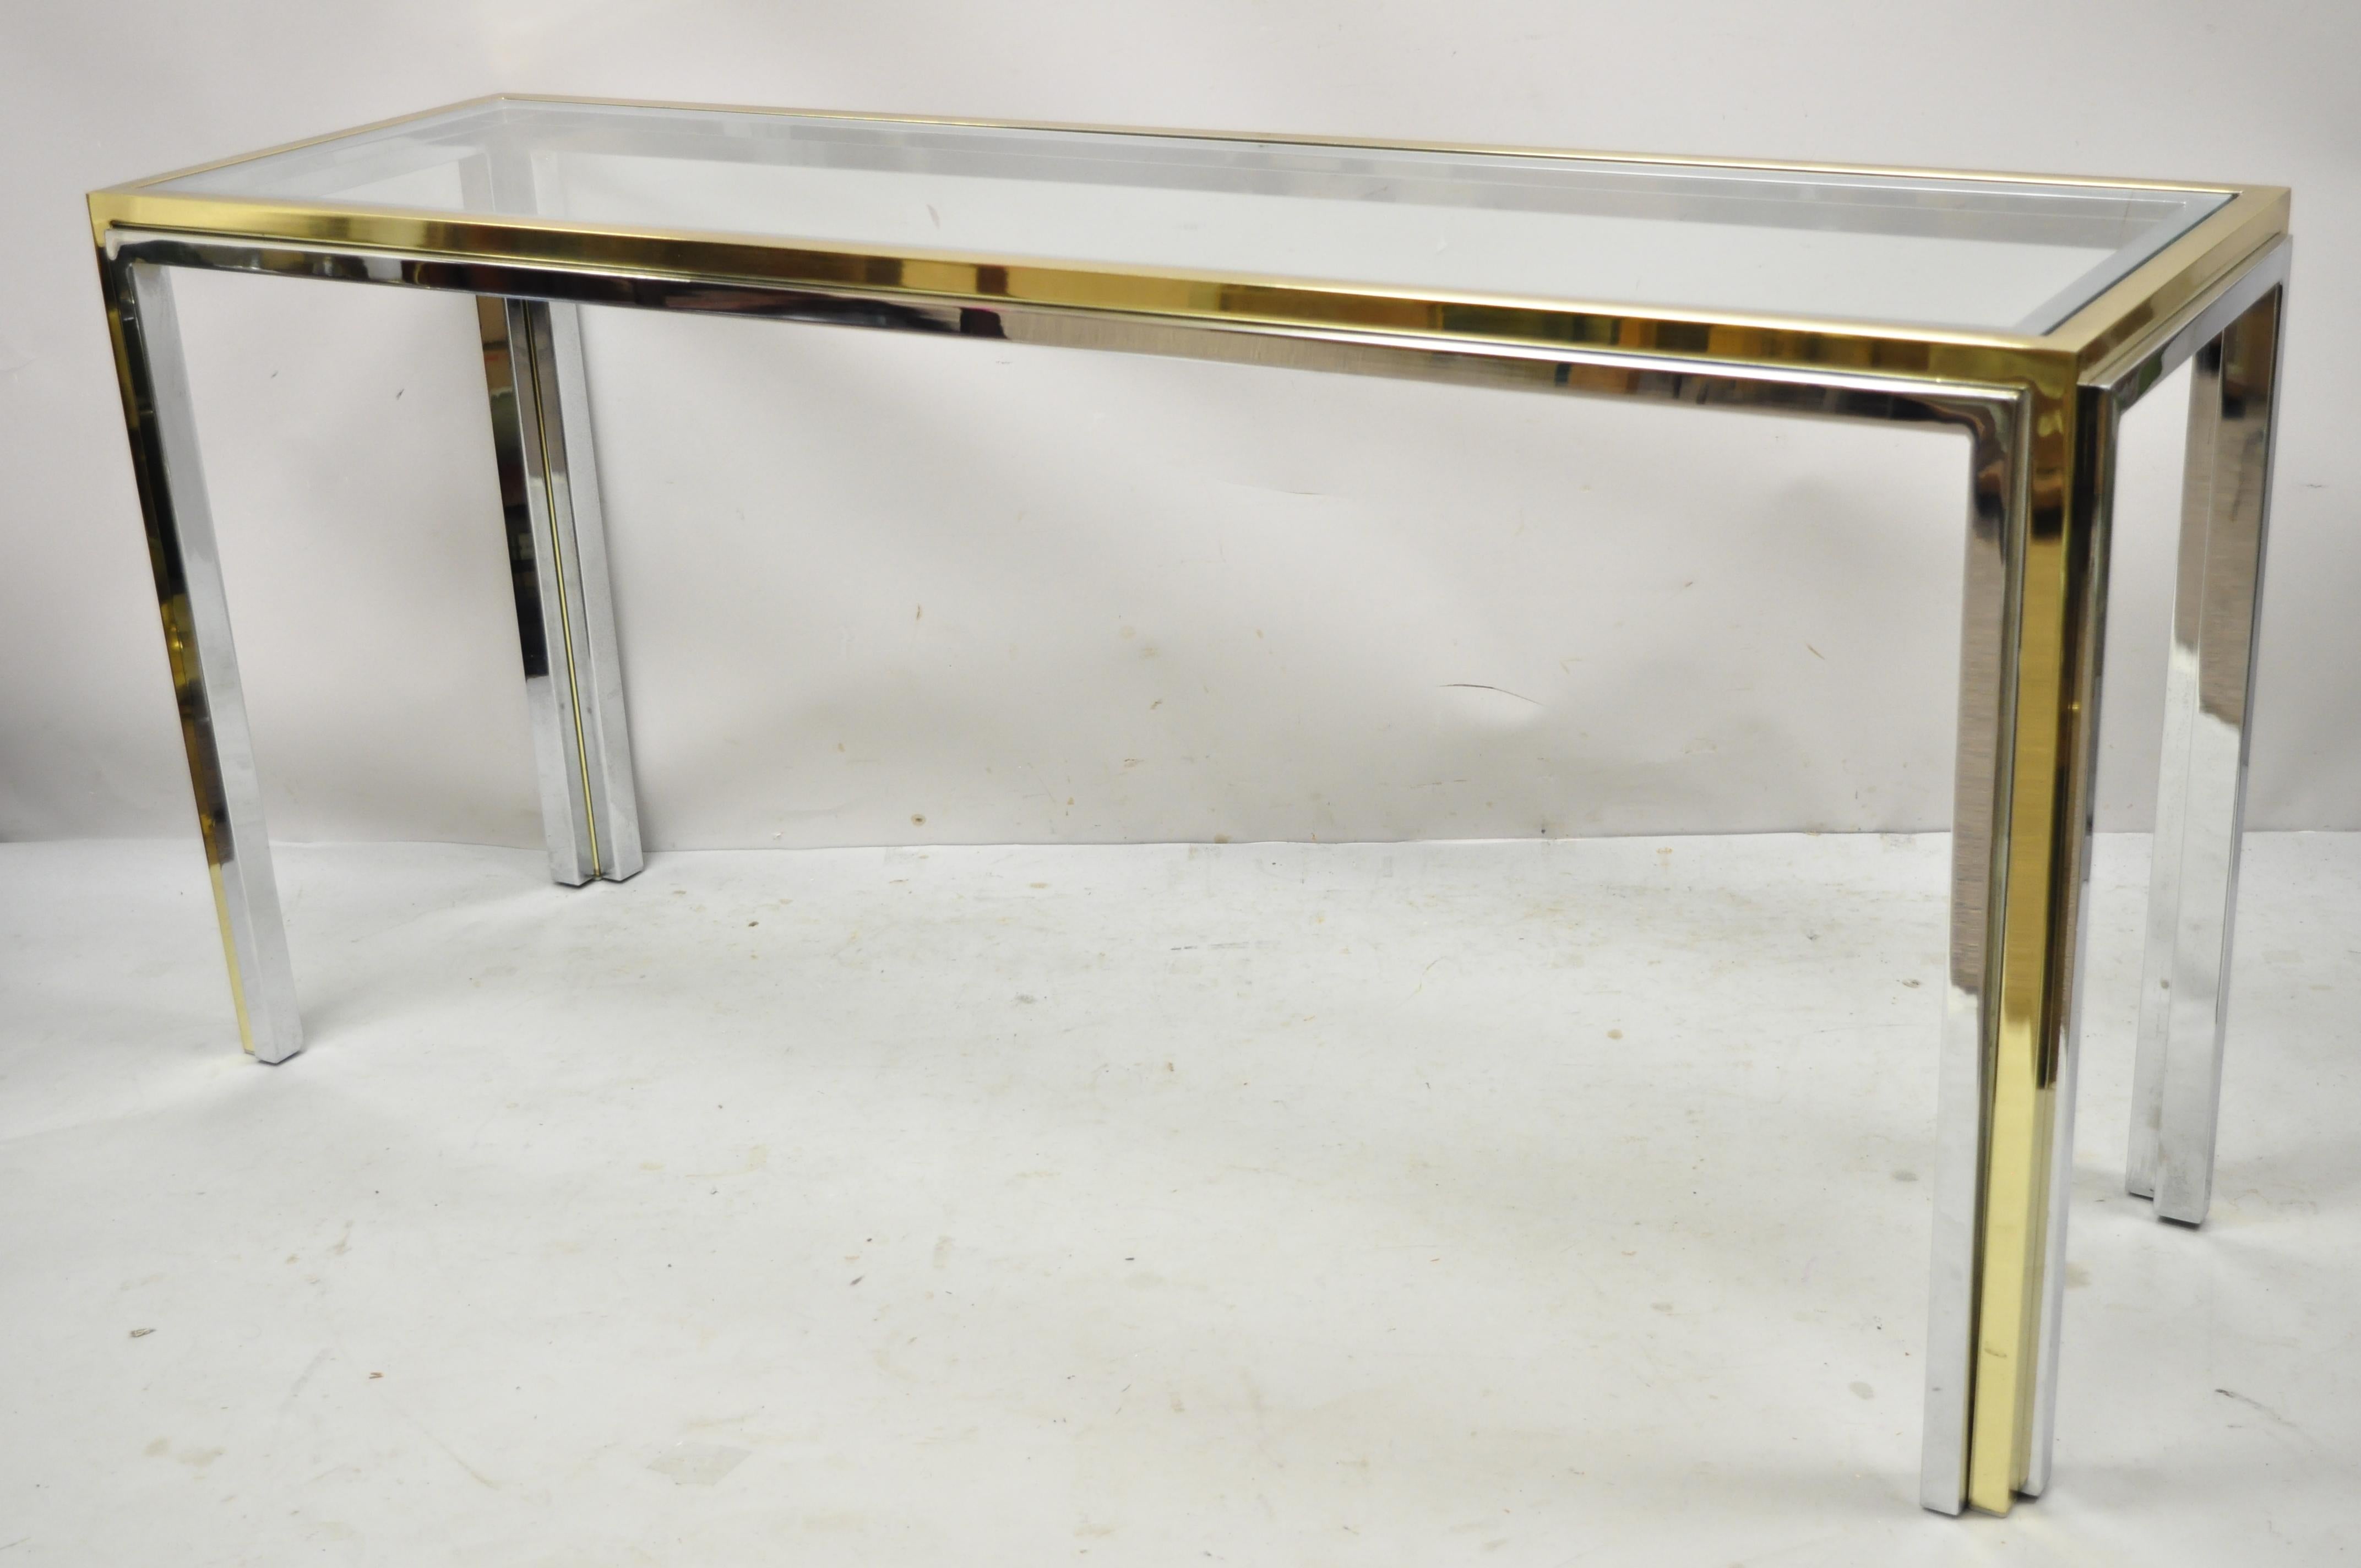 Vintage Romeo Rega Modern Maison Jansen Style Chrome and Brass Console Sofa Table. Item features chrome plated steel and brass sleek frame, inset glass top, very nice vintage item, clean modernist lines, quality Italian craftsmanship. Circa 1970s.